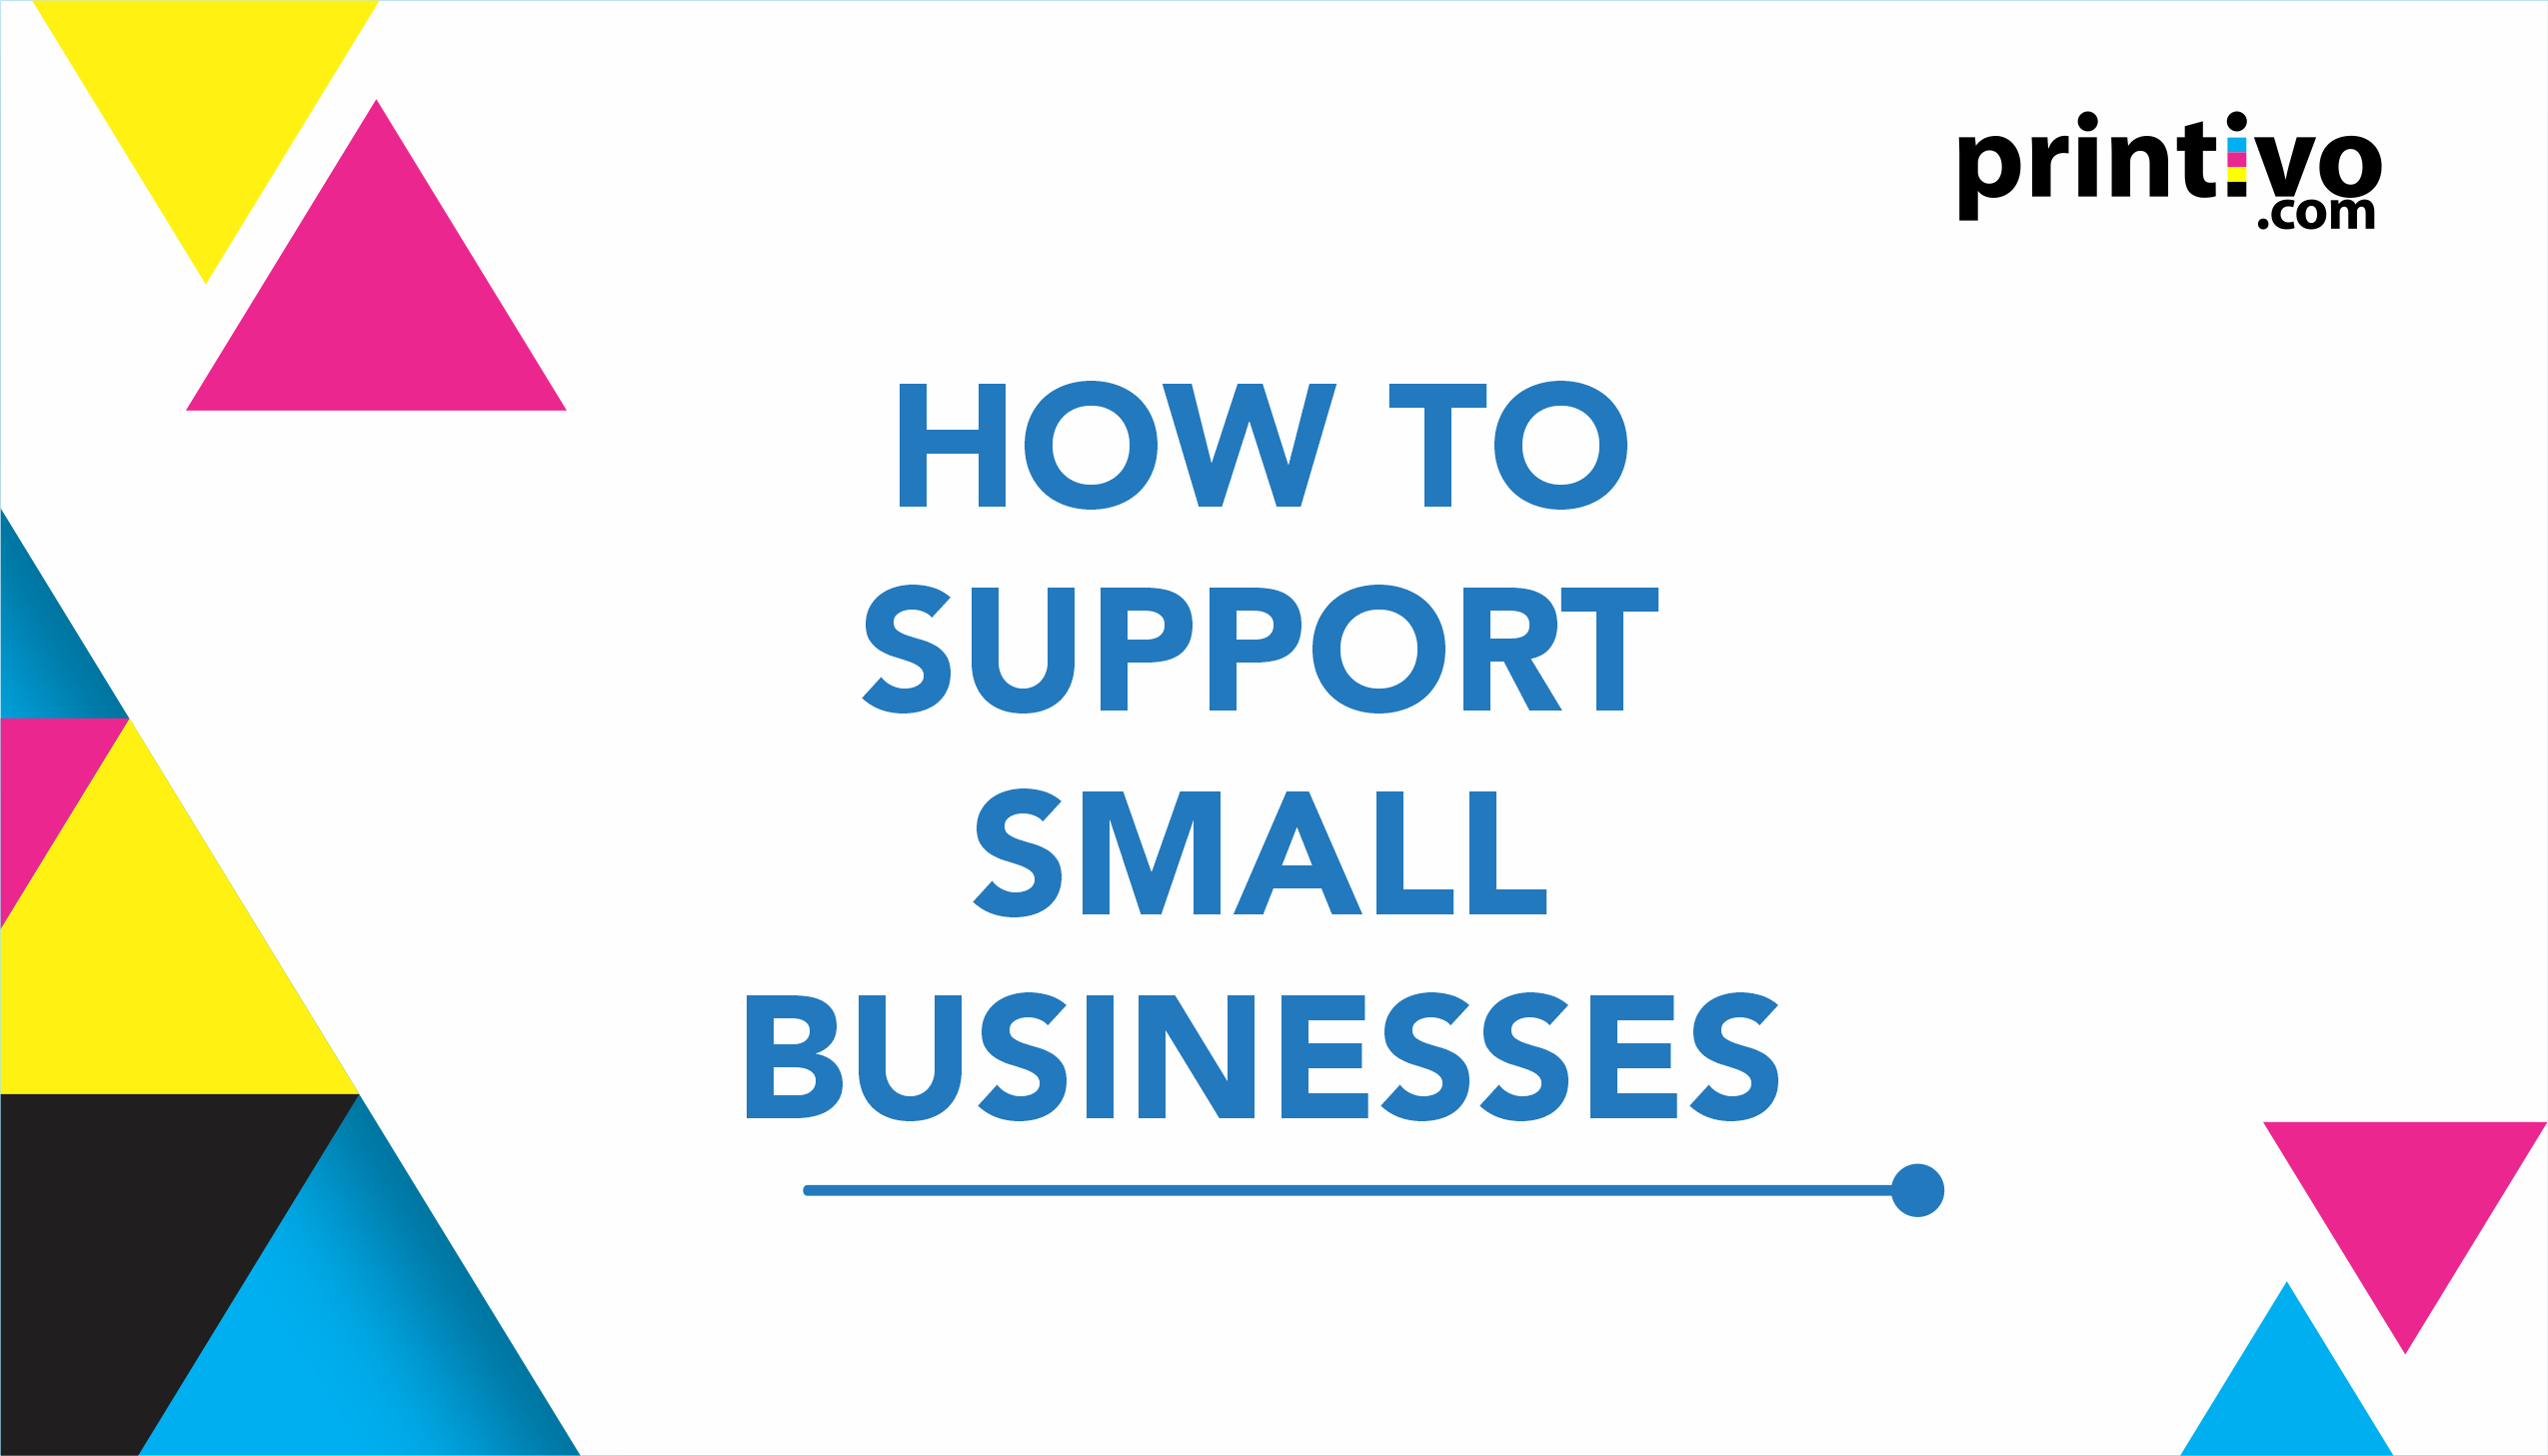 How to support small businesses